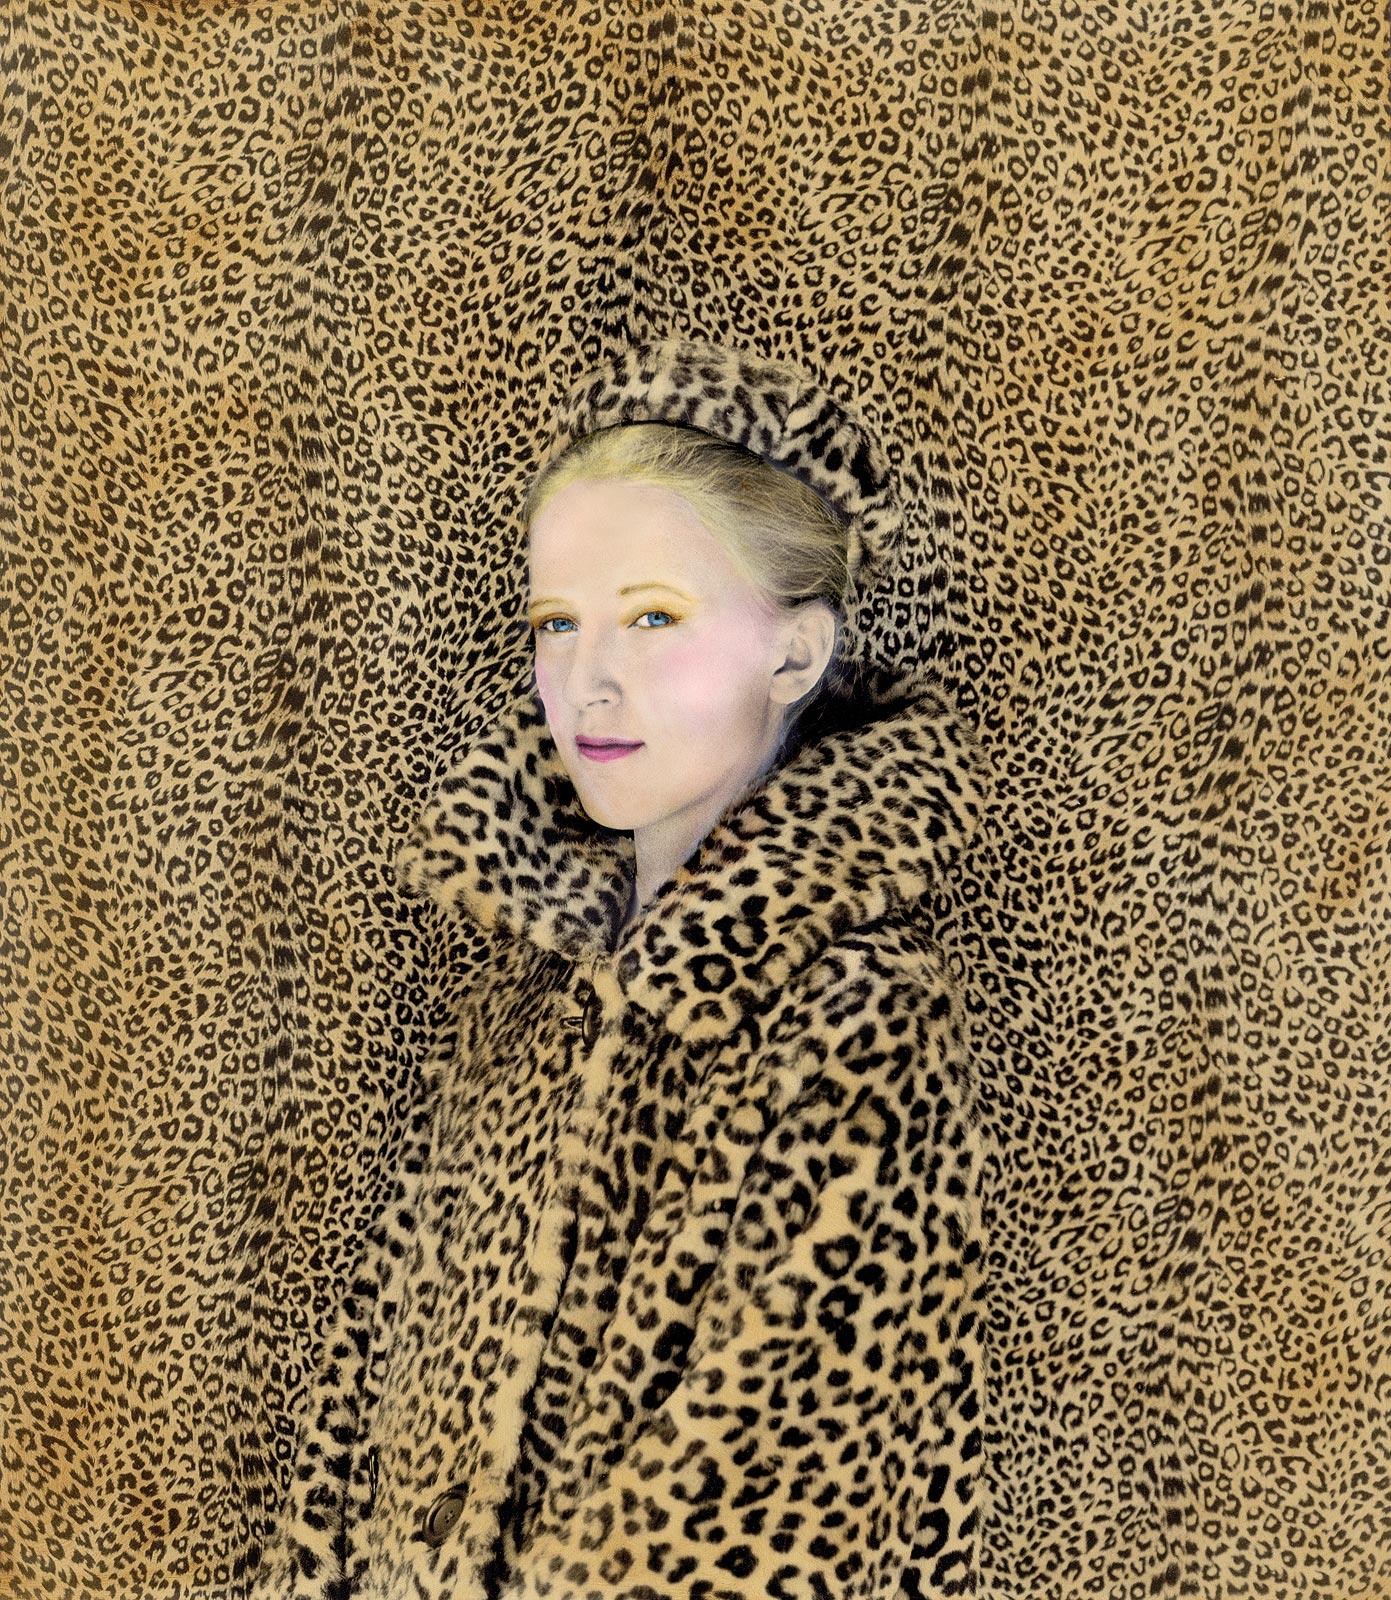 Aline Smithson, Fur, 2013, from the Daughter Series. Image Size: Framed (matted in linen framed in gold frame) size: 16.75 x 14.25". Edition of 15. Hand painted gelatin silver print. edition of 15.

After a career as a New York Fashion Editor and